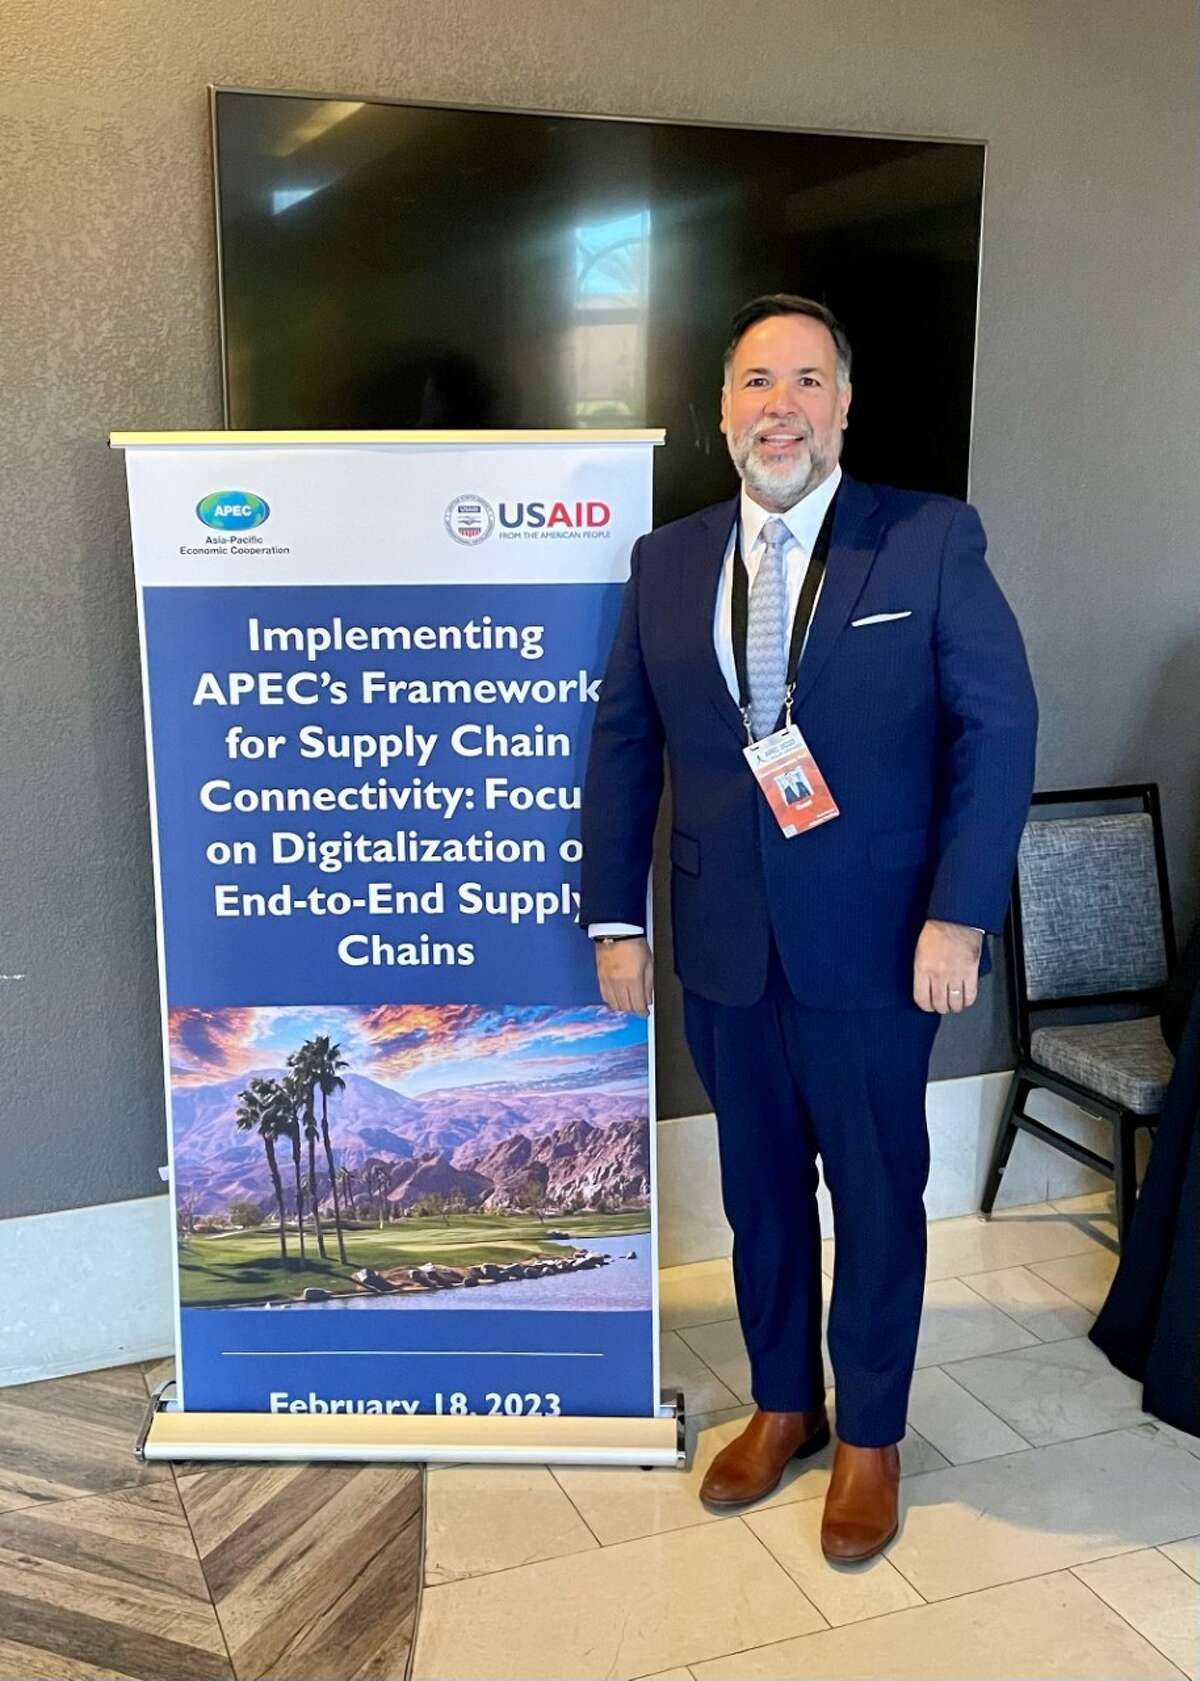 Dr. Daniel Covarrubias, TAMIU Director of the Texas Center for Border Economic and Enterprise Development attended the Asia Pacific Economic Cooperation 2023 Summit held at Palm Springs, California in mid-February.